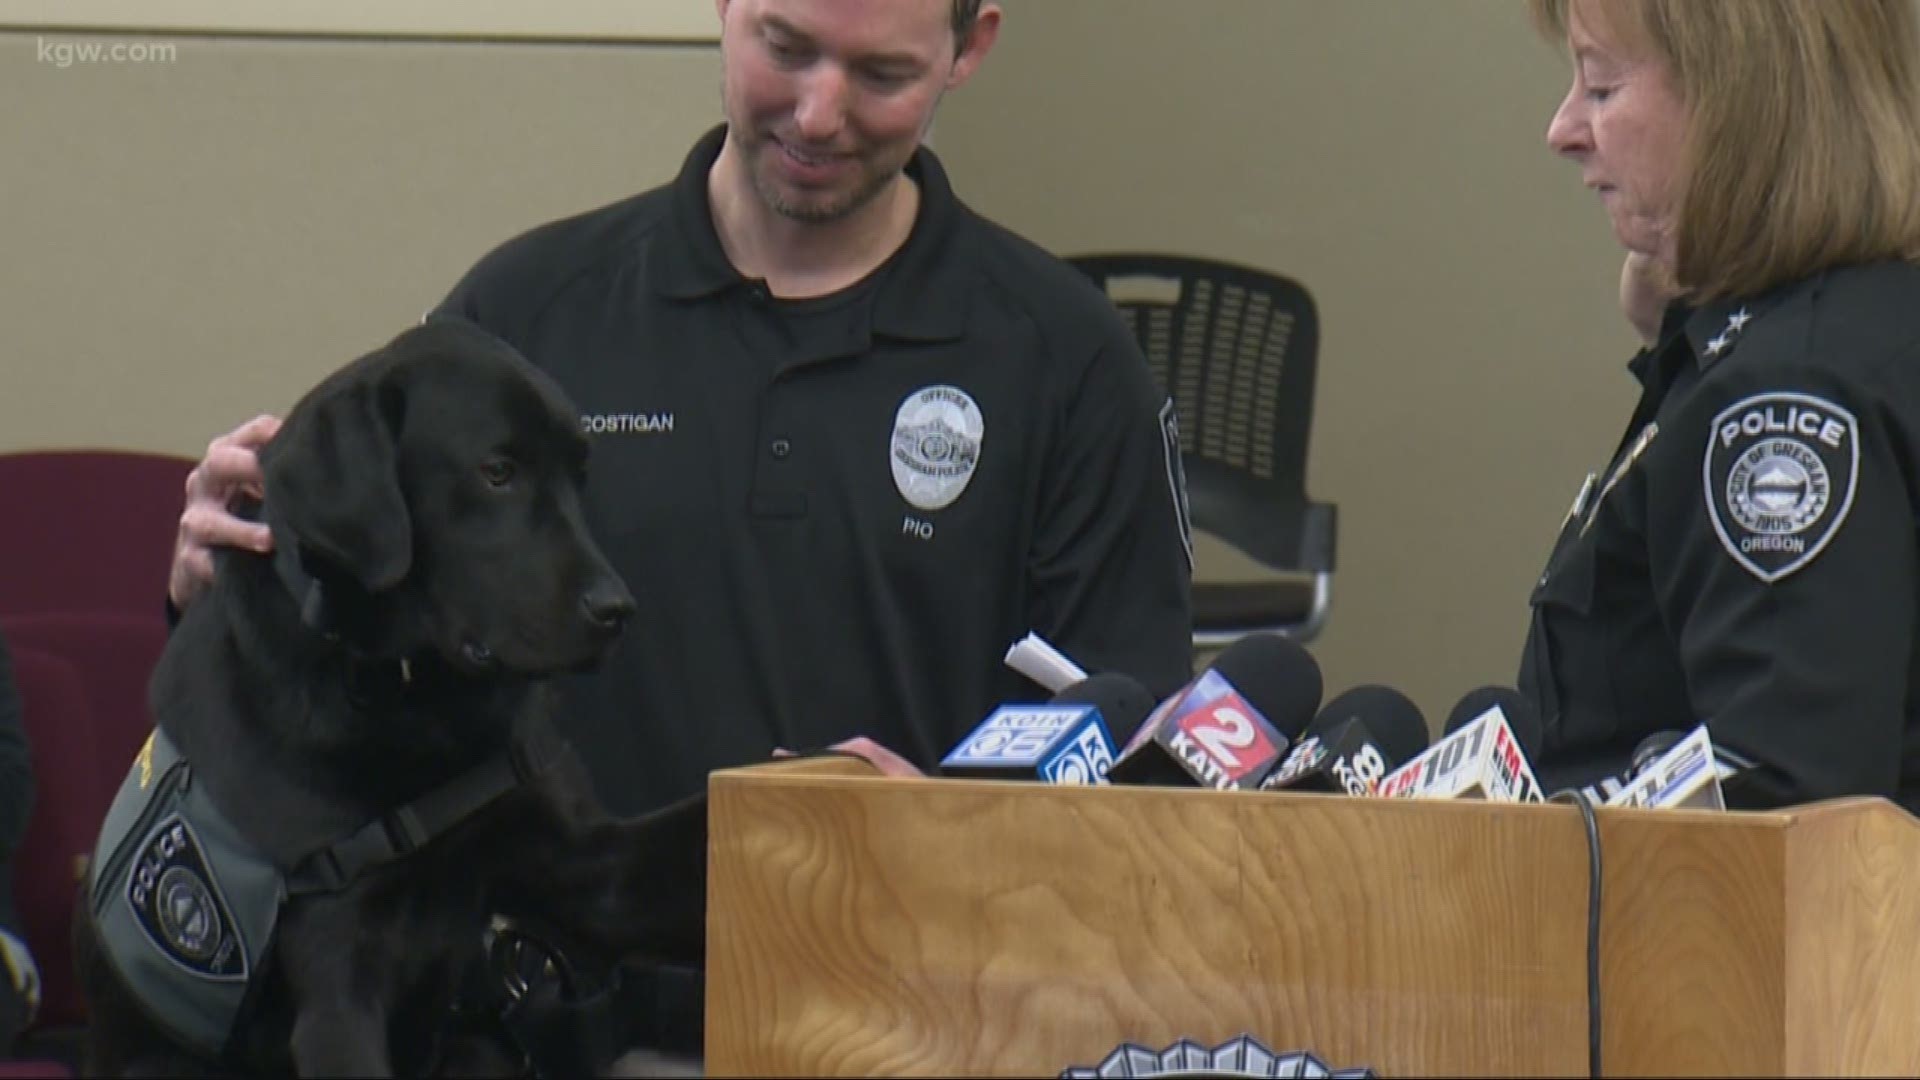 Meet Tagg! He’s the newest member of the Gresham police force.